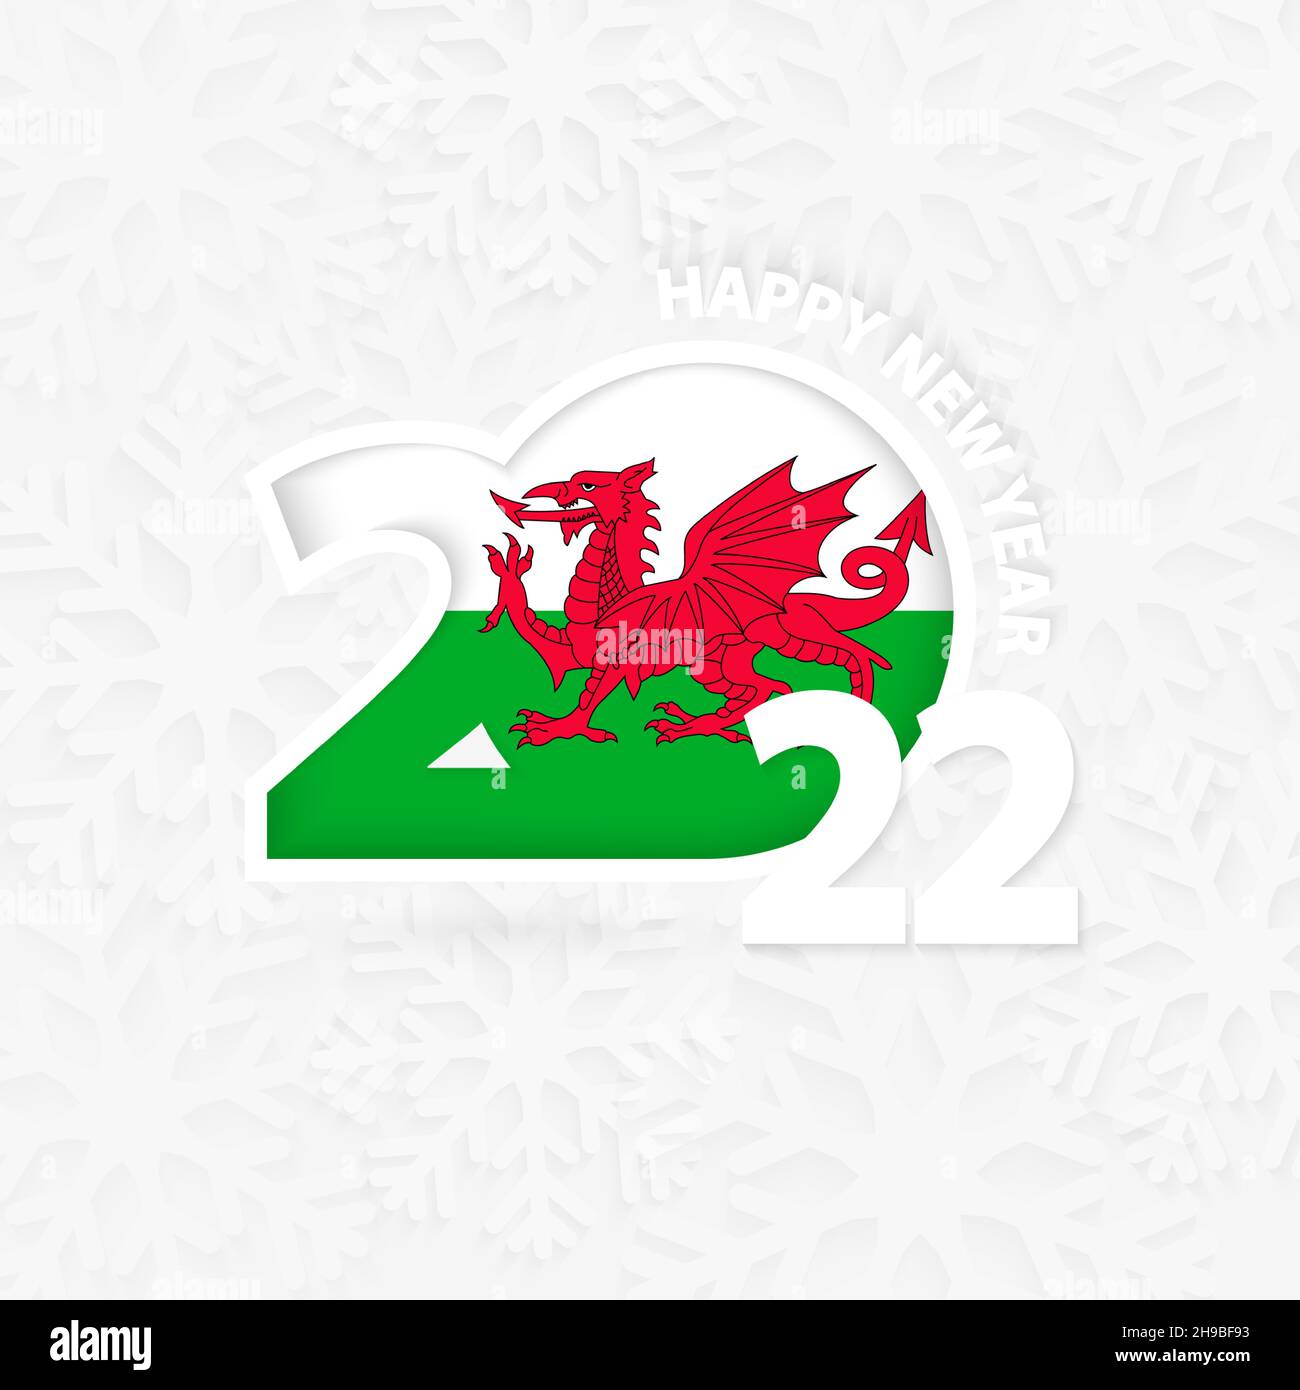 Happy New Year 2022 for Wales on snowflake background. Greeting Wales with new 2022 year. Stock Vector